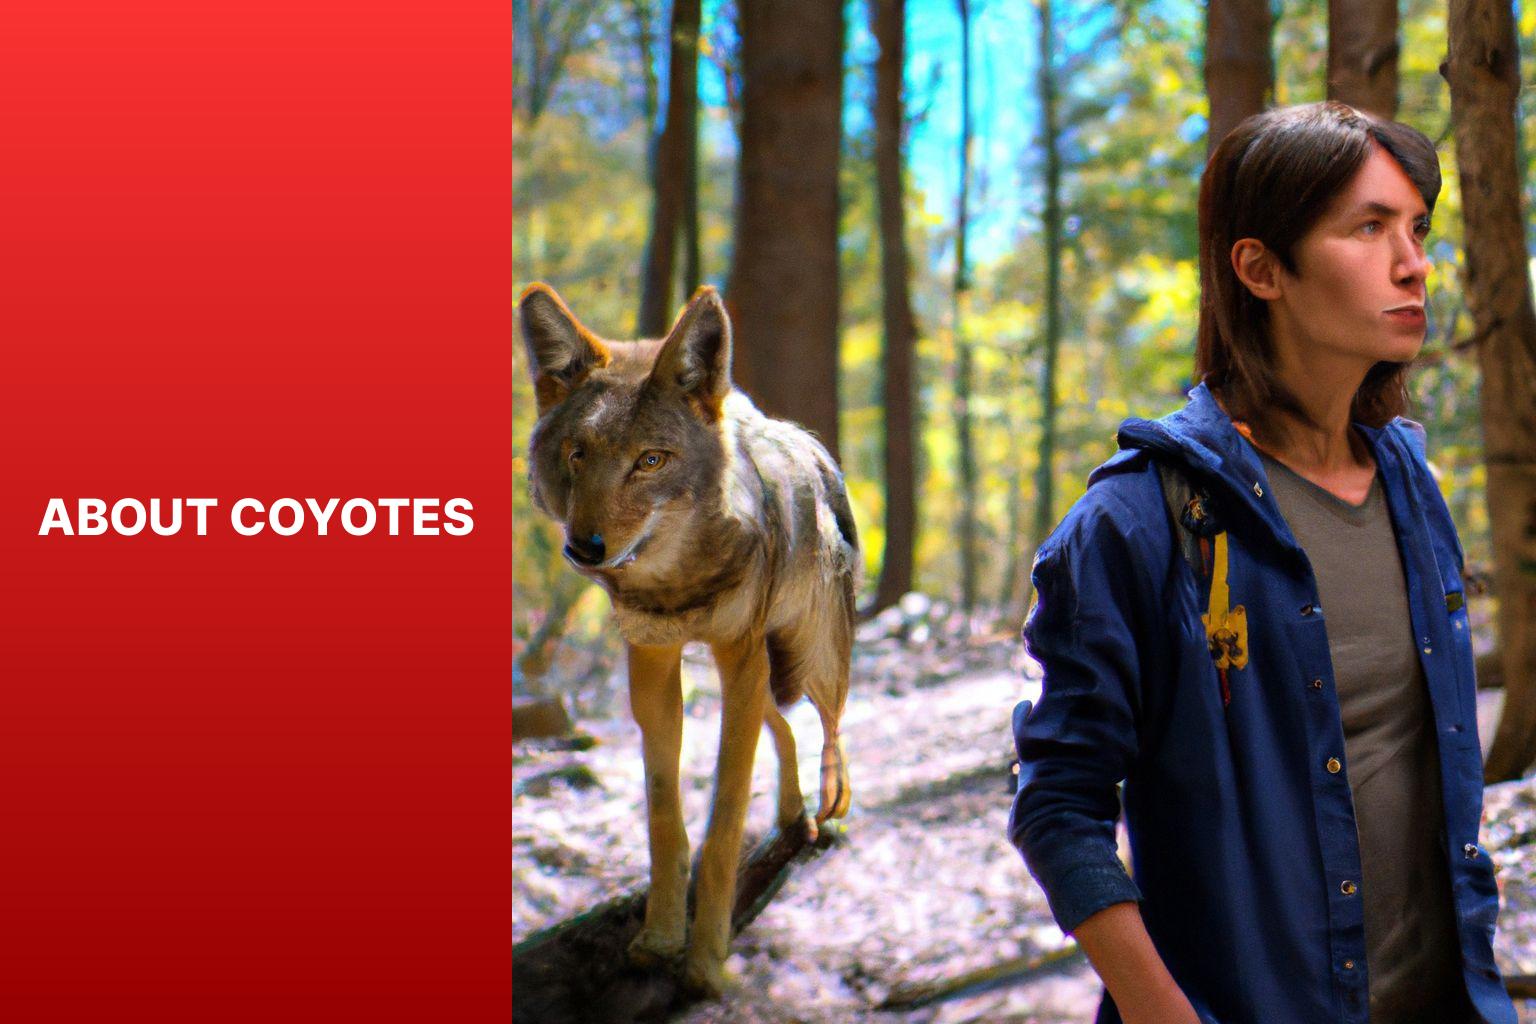 About Coyotes - What to Do if You See a Coyote While Hiking 